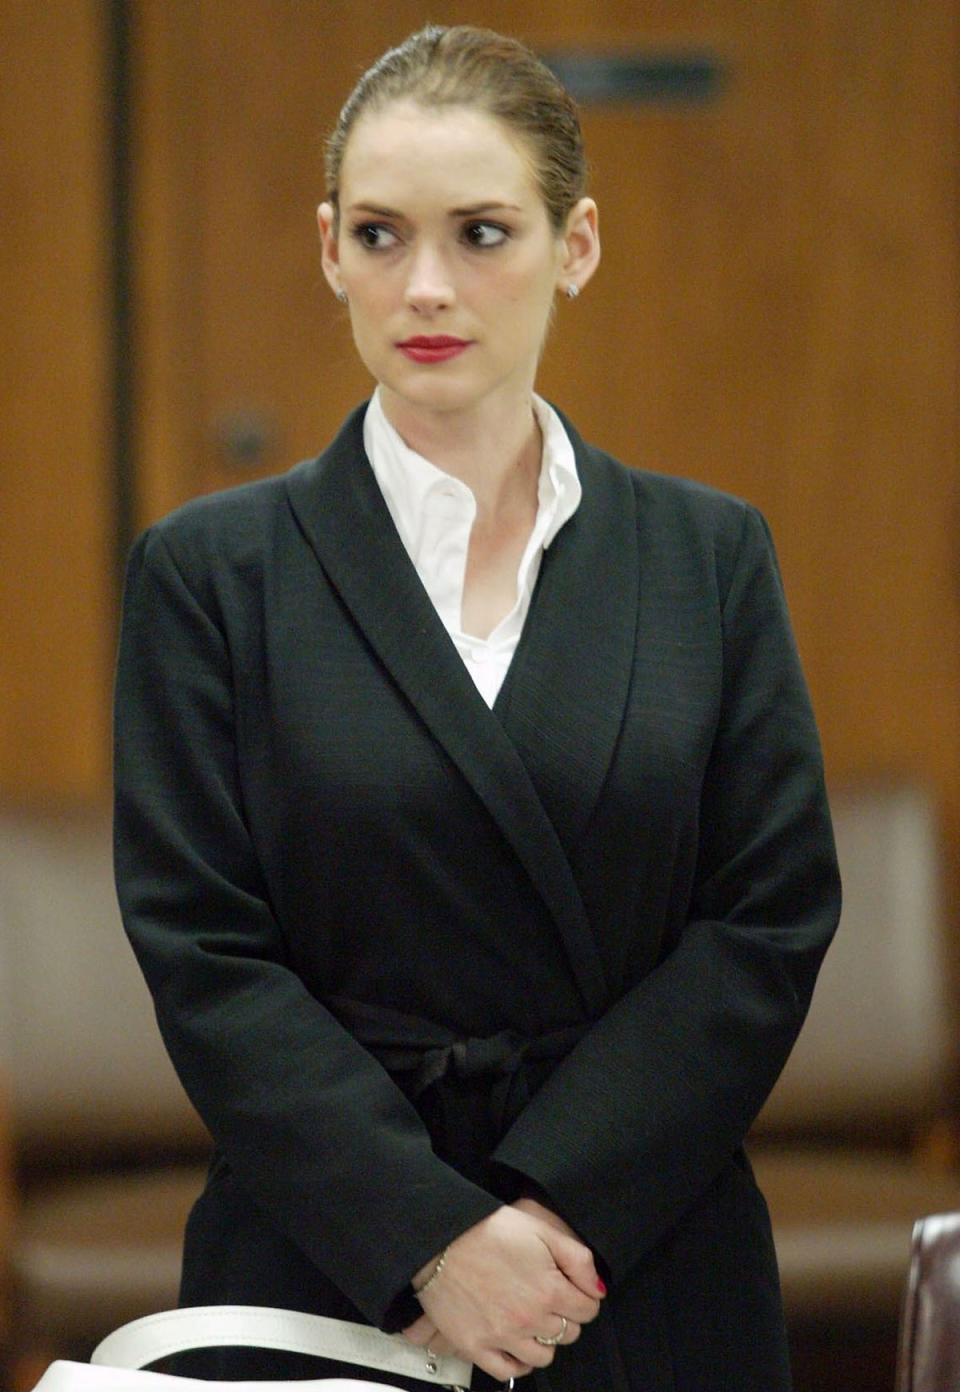 Actress Winona Ryder appears at Beverly Hills Superior Court April 7, 2003 in Beverly Hills for a progress report following her conviction for shoplifting from Saks Fifth Avenue in Beverly Hills (AP)